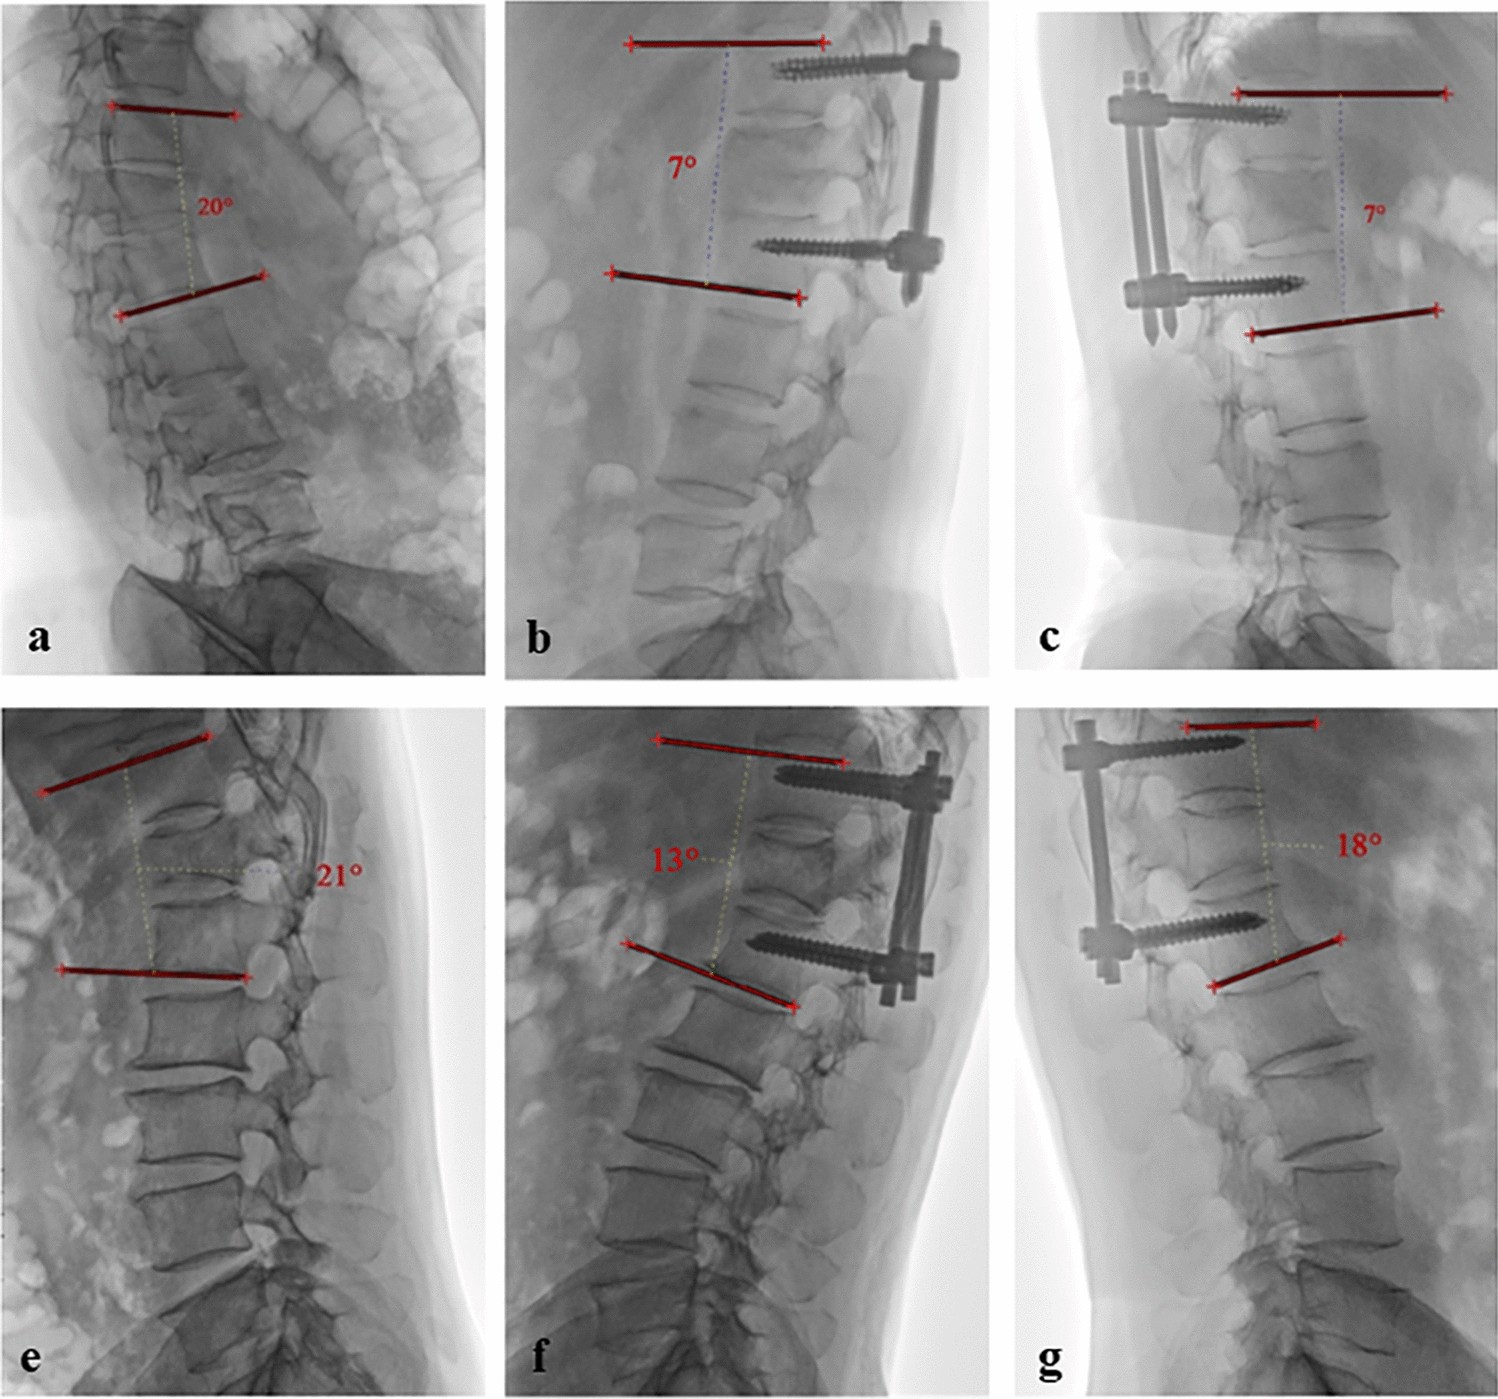 Association between paraspinal muscle fat infiltration and regional  kyphosis angle in thoracolumbar fracture patients: a retrospective study